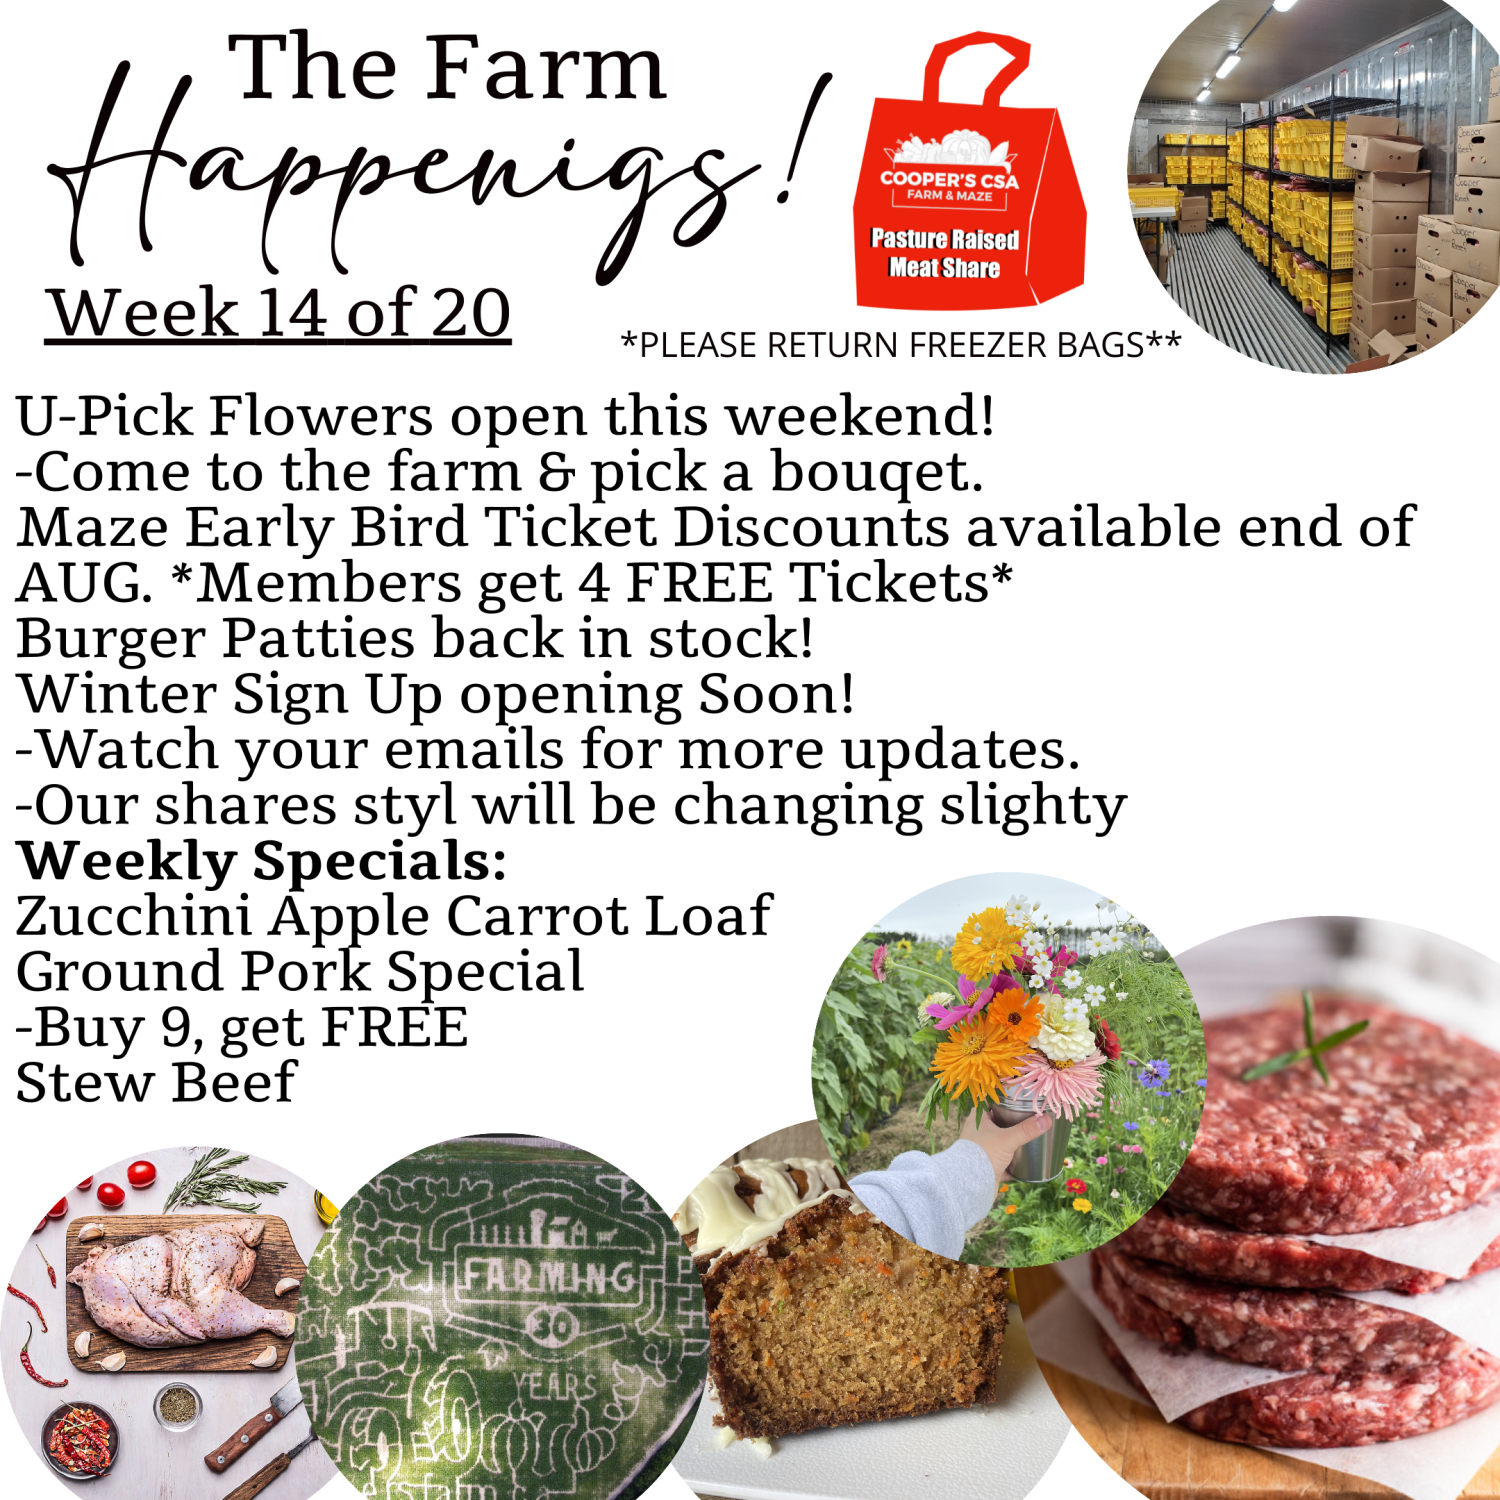 "Pasture Meat Shares"-Coopers CSA Farm Farm Happenings Week 14